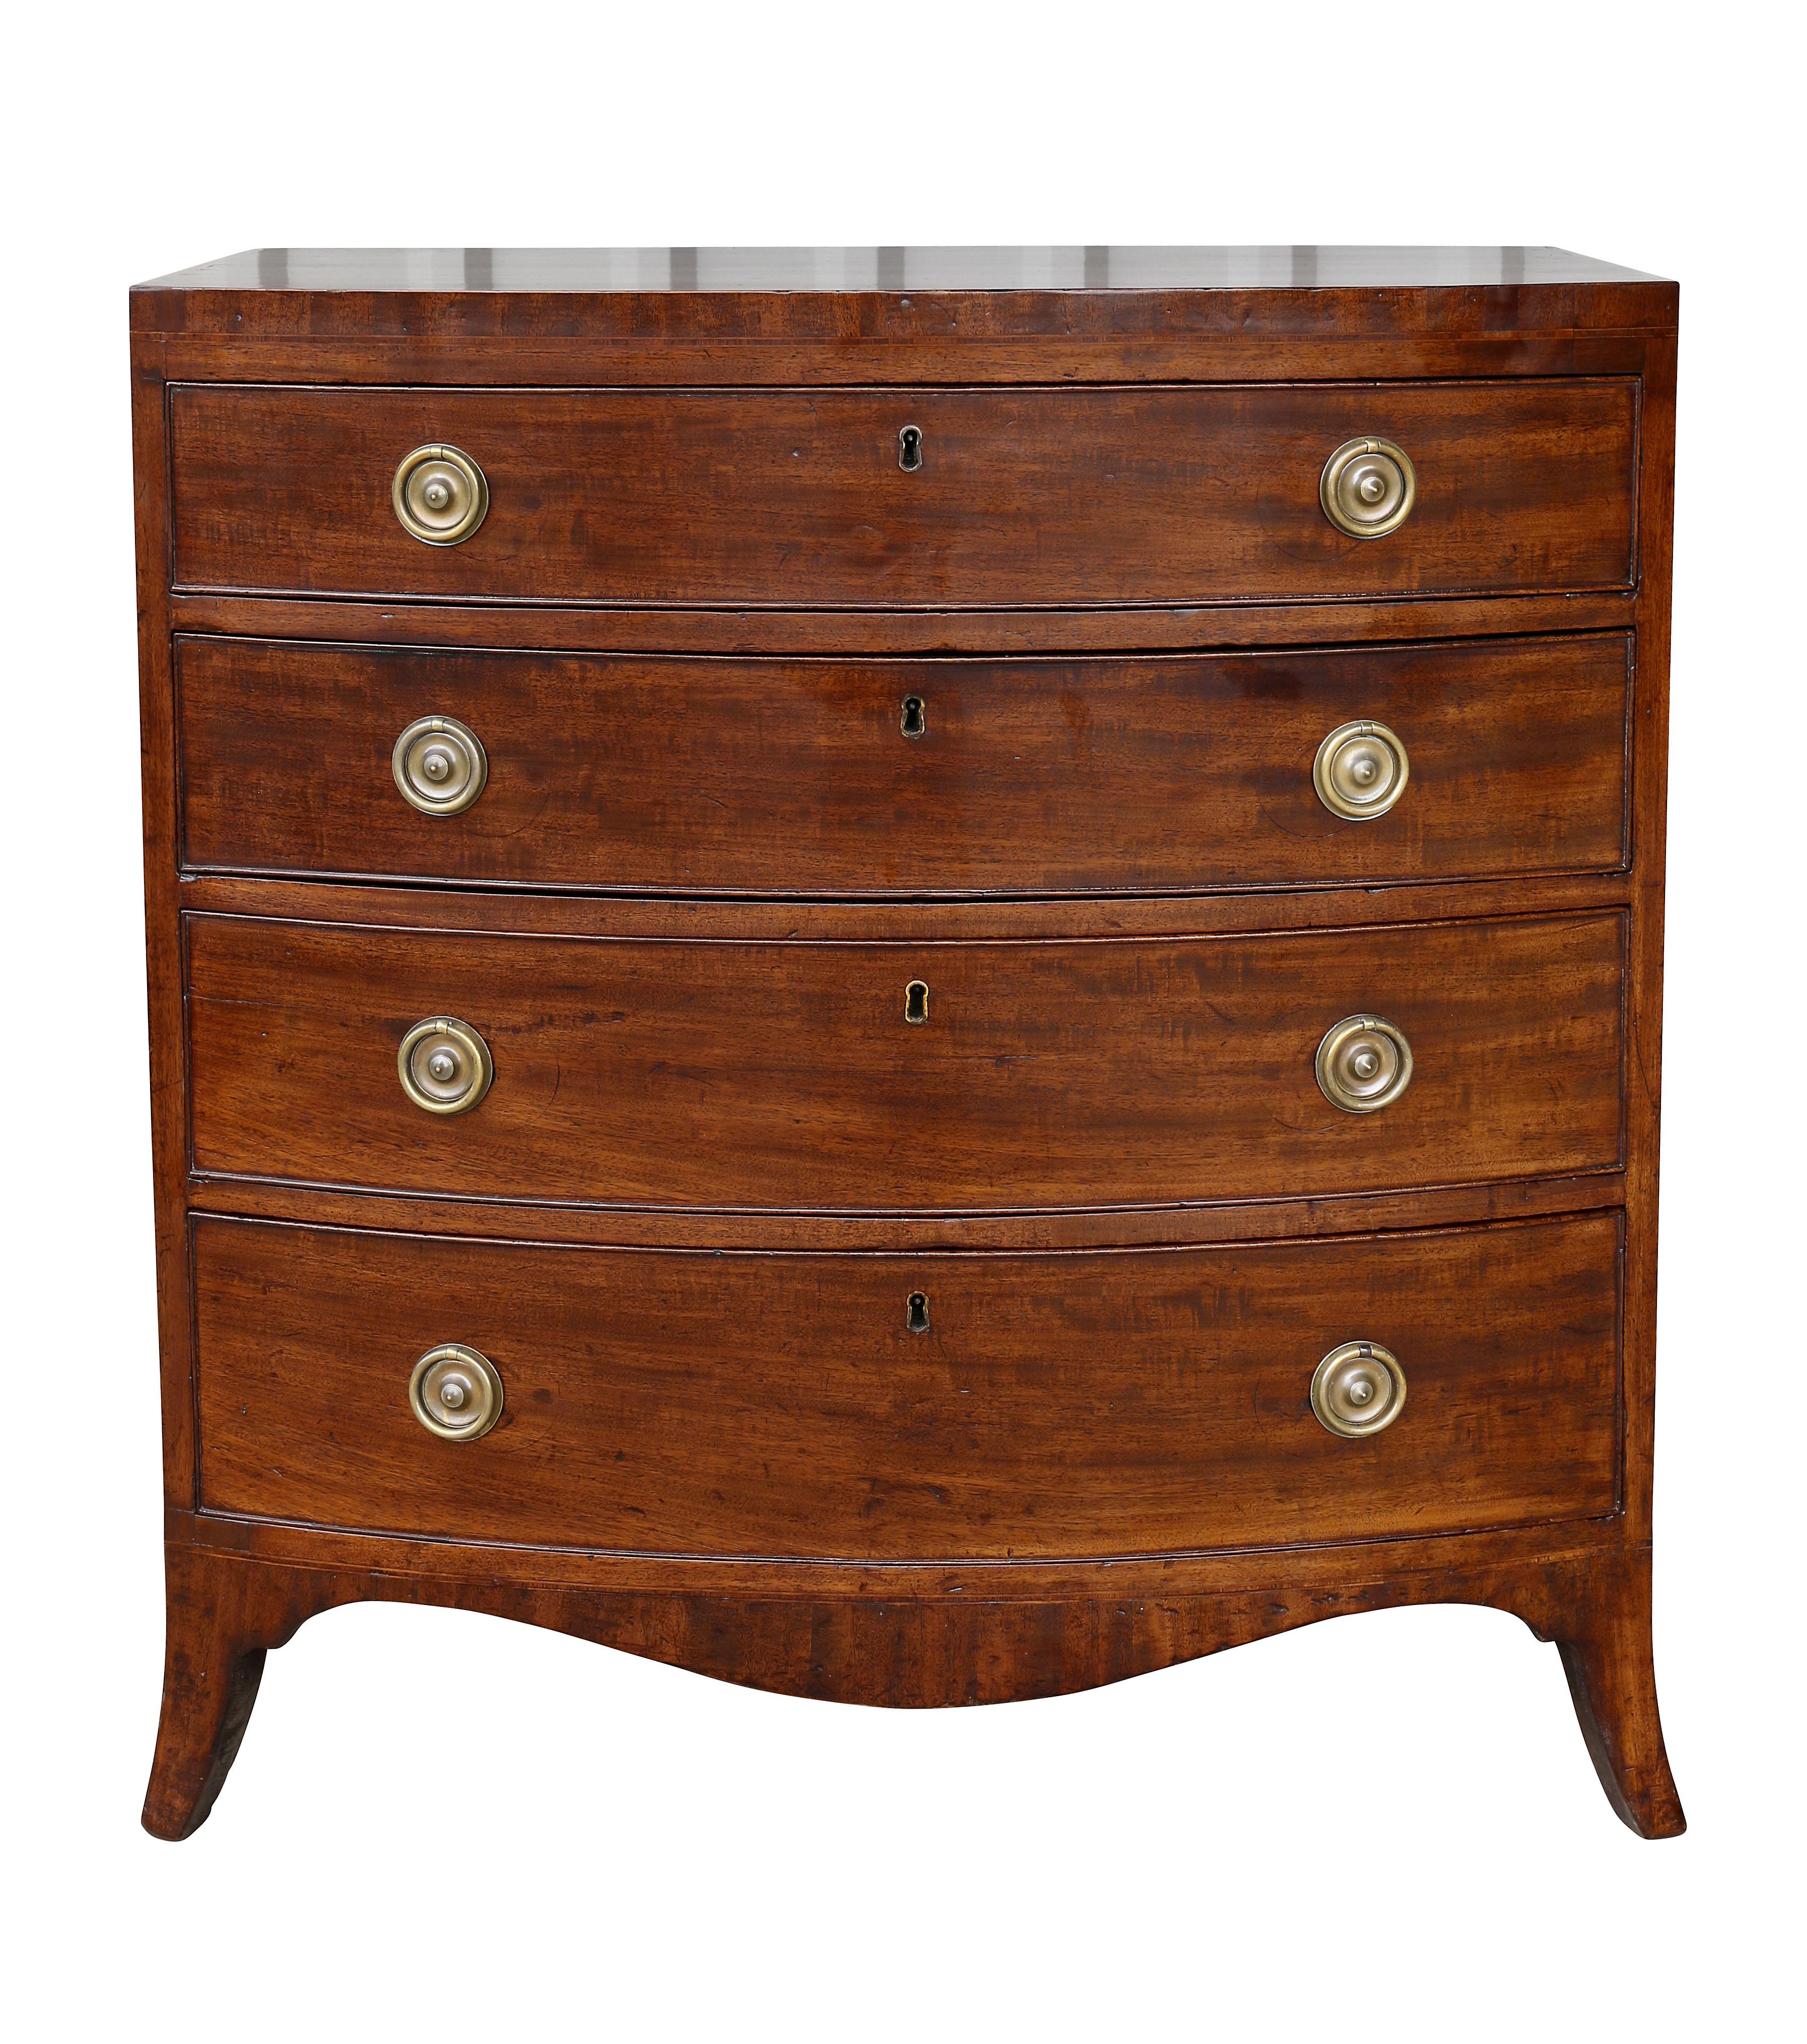 With a bowed top over four graduated drawers with circular brass ring handles raised on splayed legs.